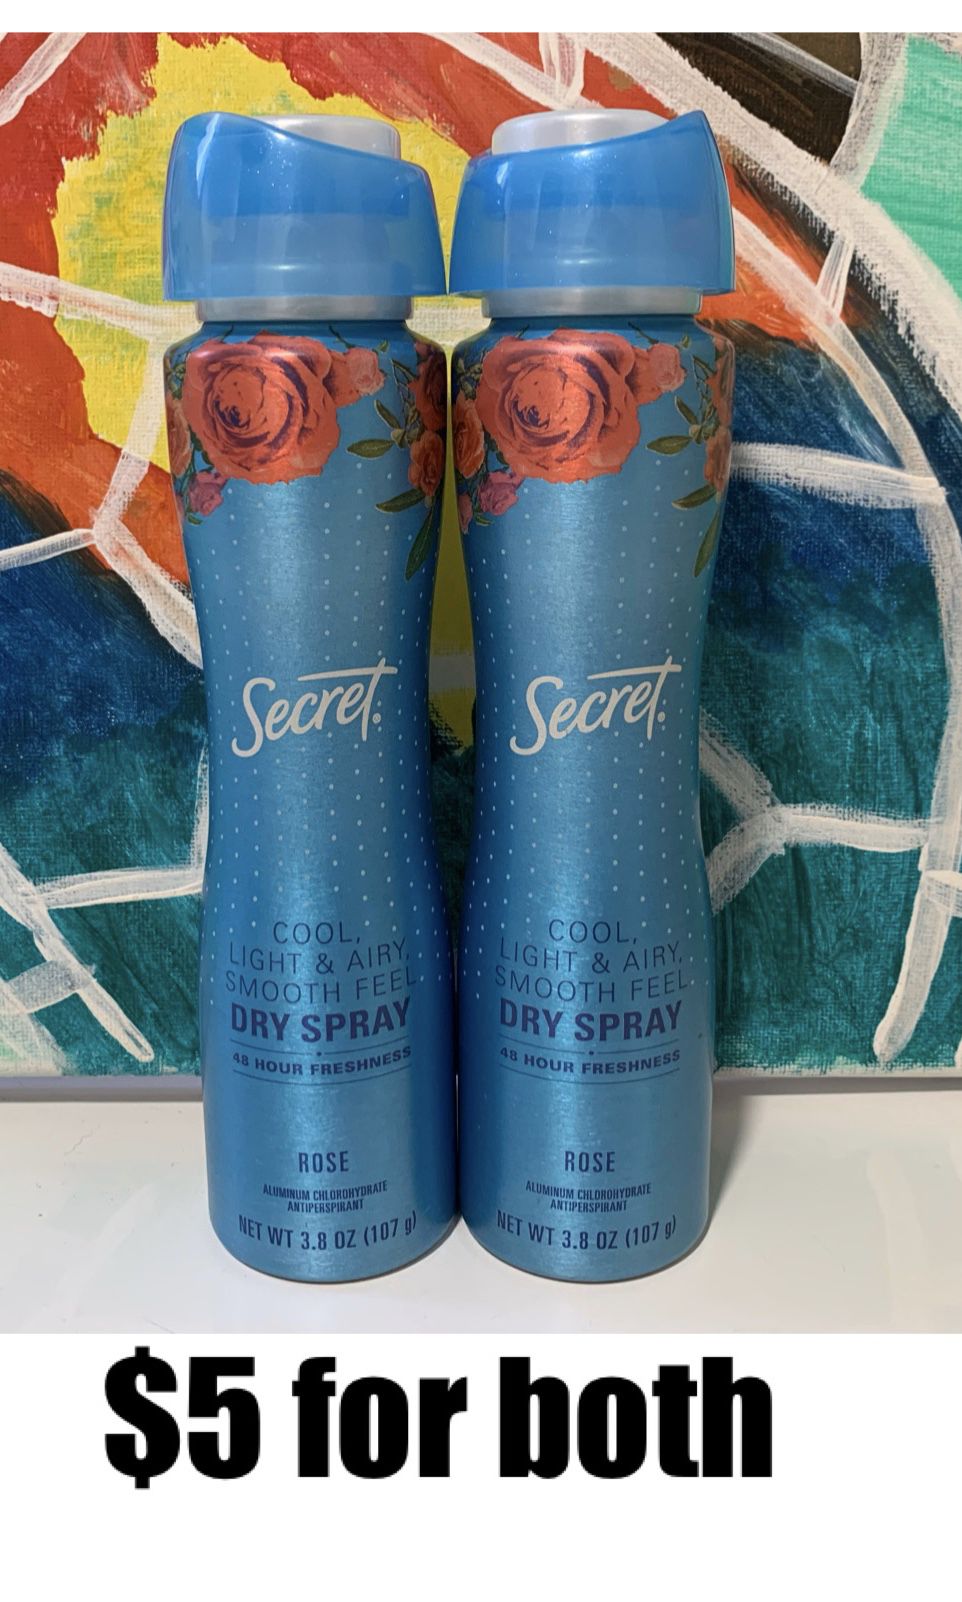 Secret Dry Spray Antiperspirant and Deodorant, Water Lily Scent Invisible Spray, 3.8 Oz.